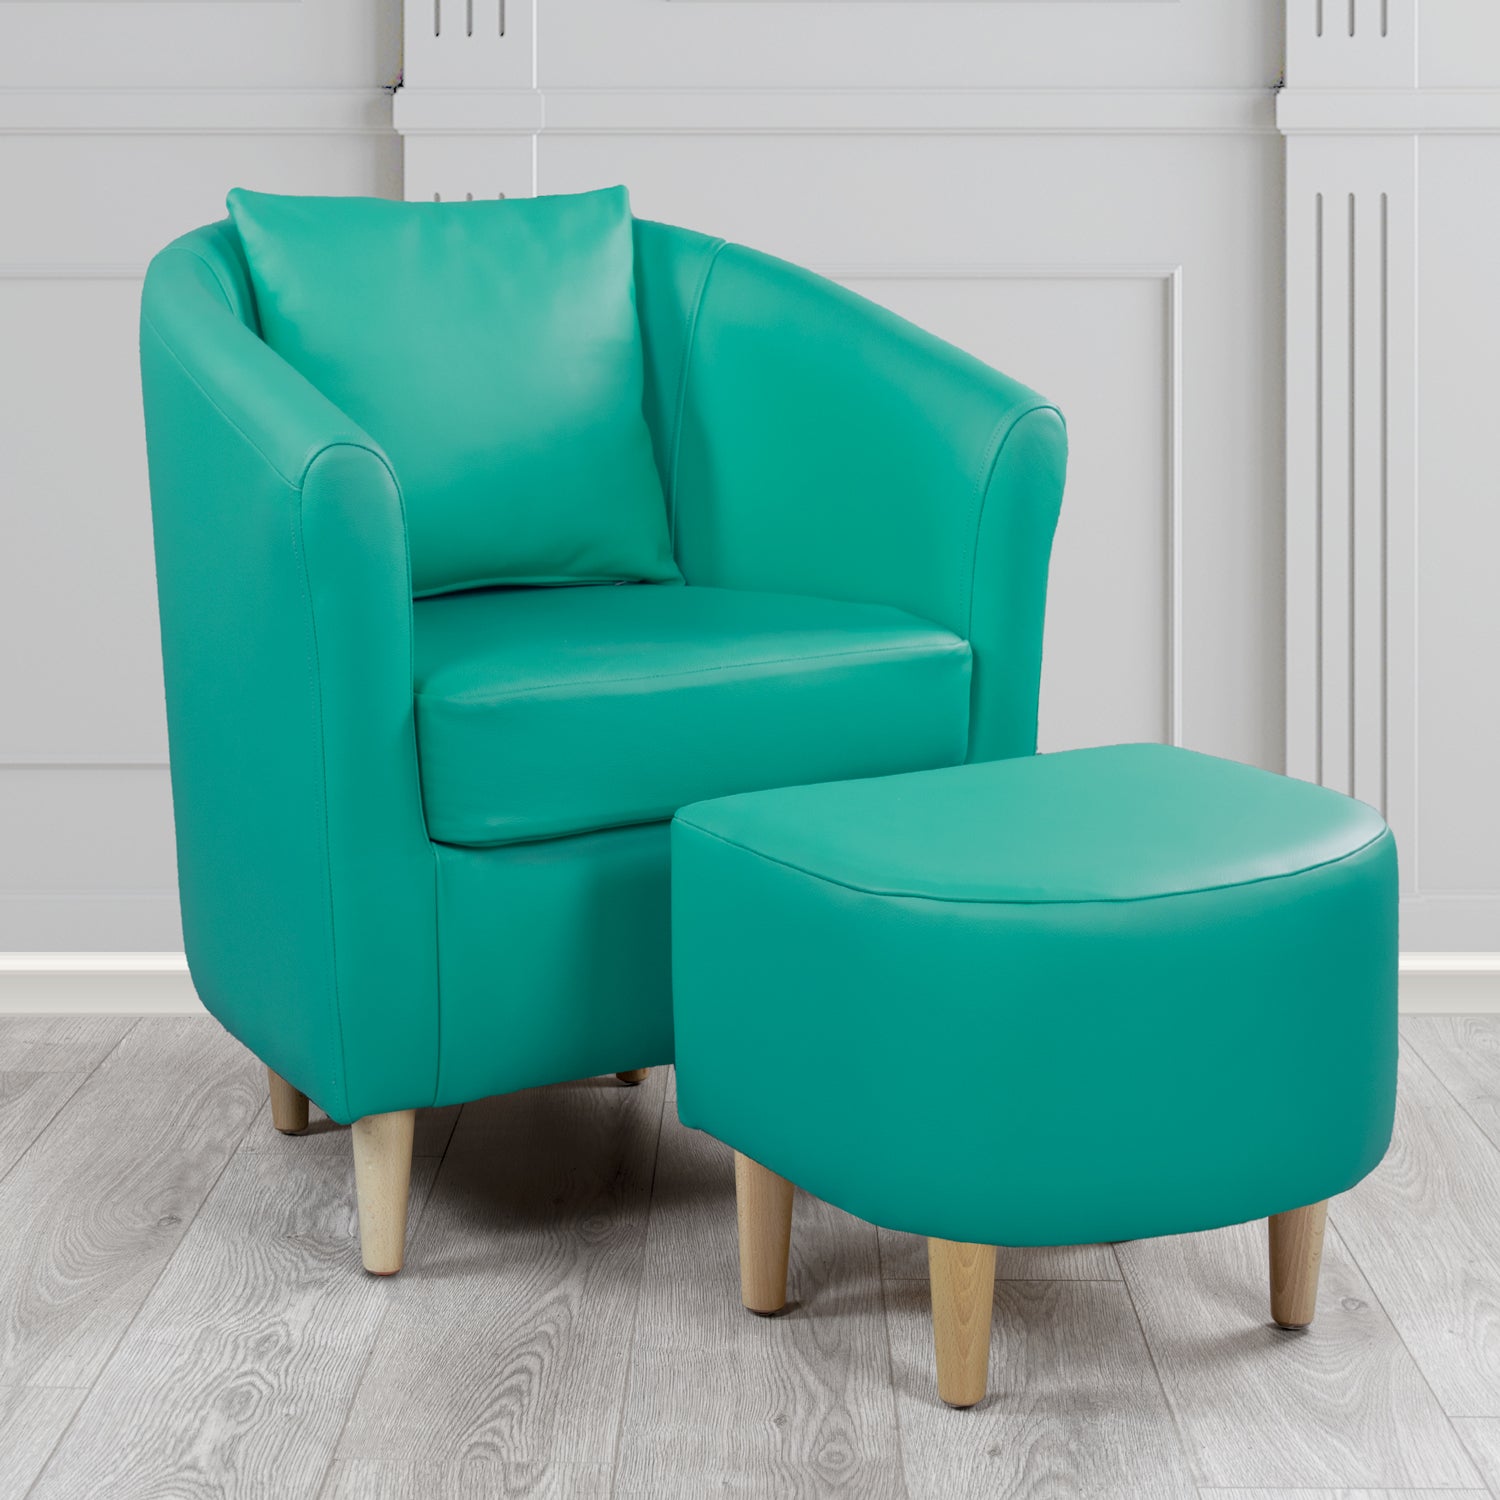 St Tropez Shelly Dark Teal Crib 5 Genuine Leather Tub Chair & Footstool Set With Scatter Cushion (6619475836970)